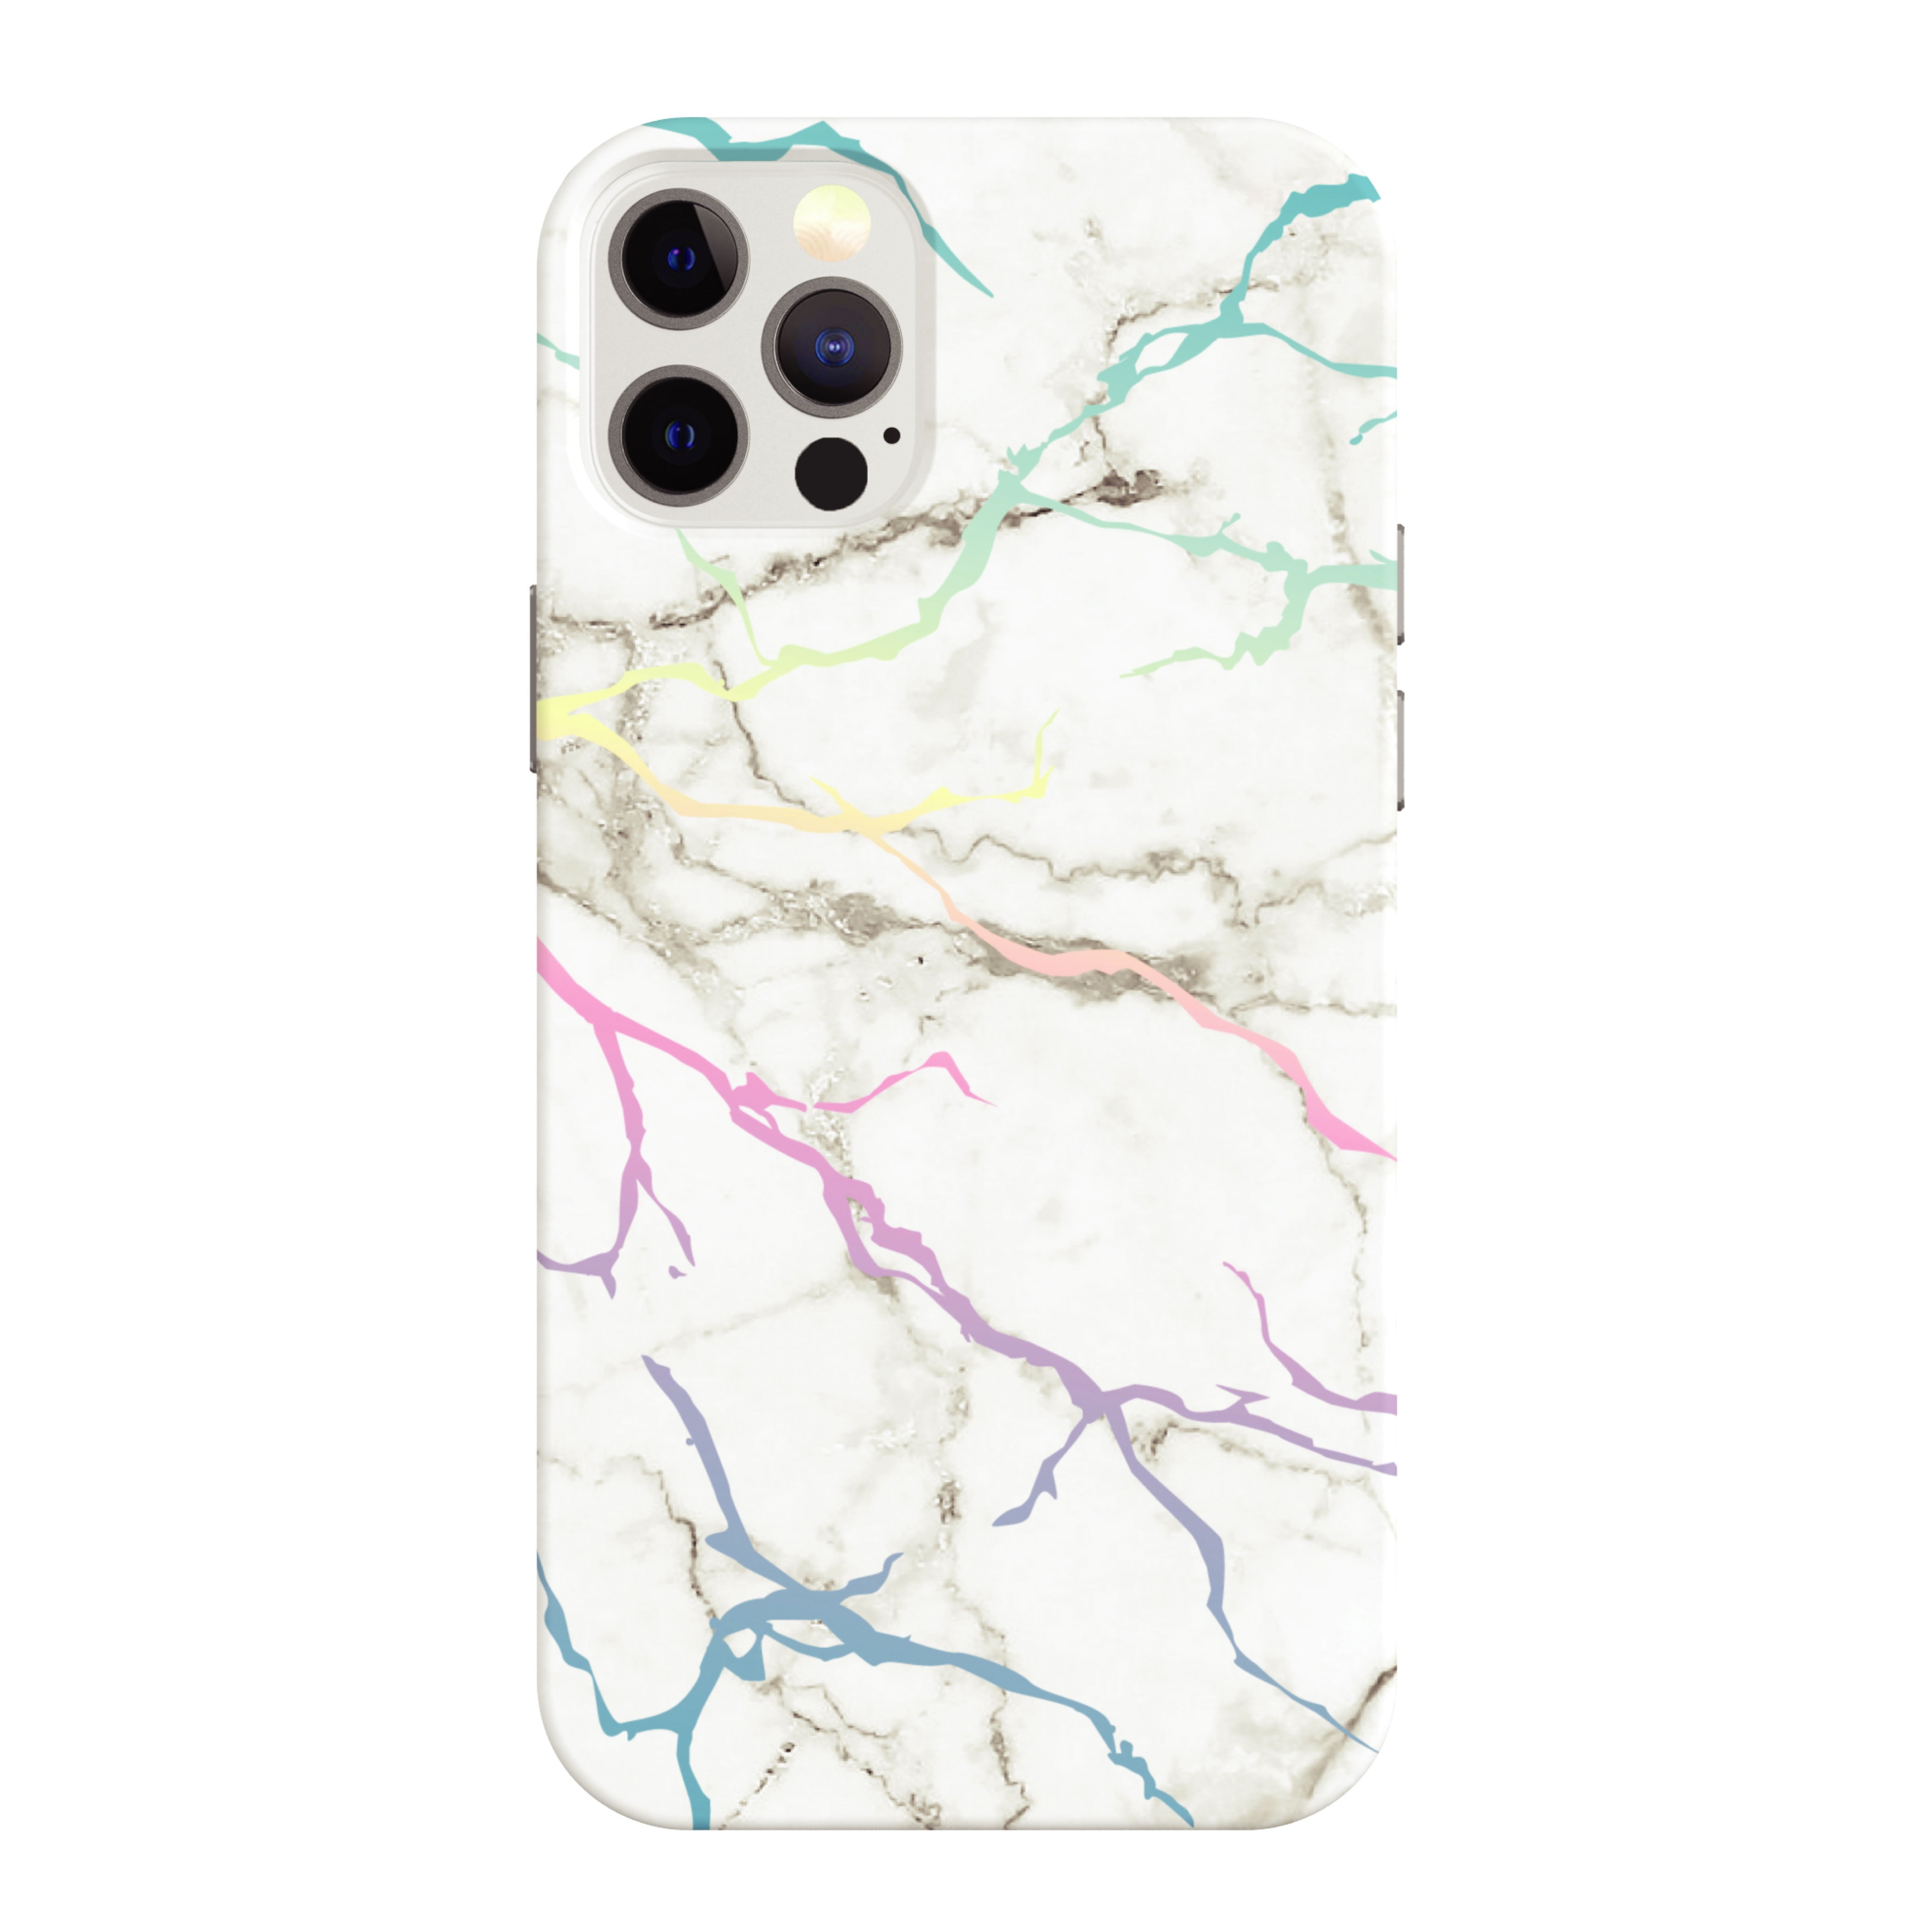 New Look White Marble Phone Case For Iphone 12 Womens Accessories Phone cases 